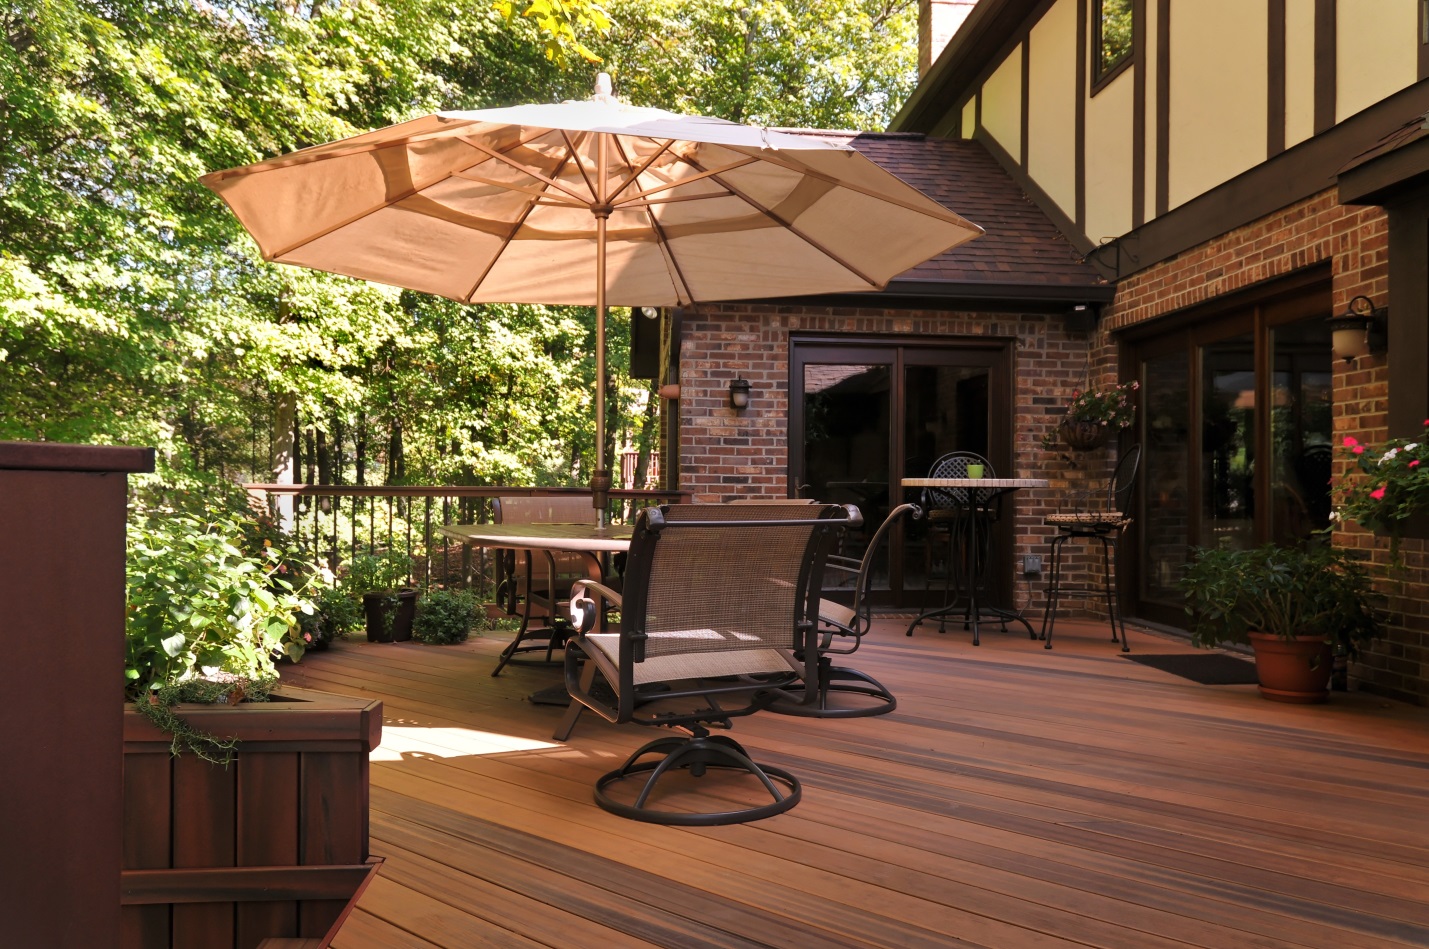 Outdoor living space addition proactive planning. 